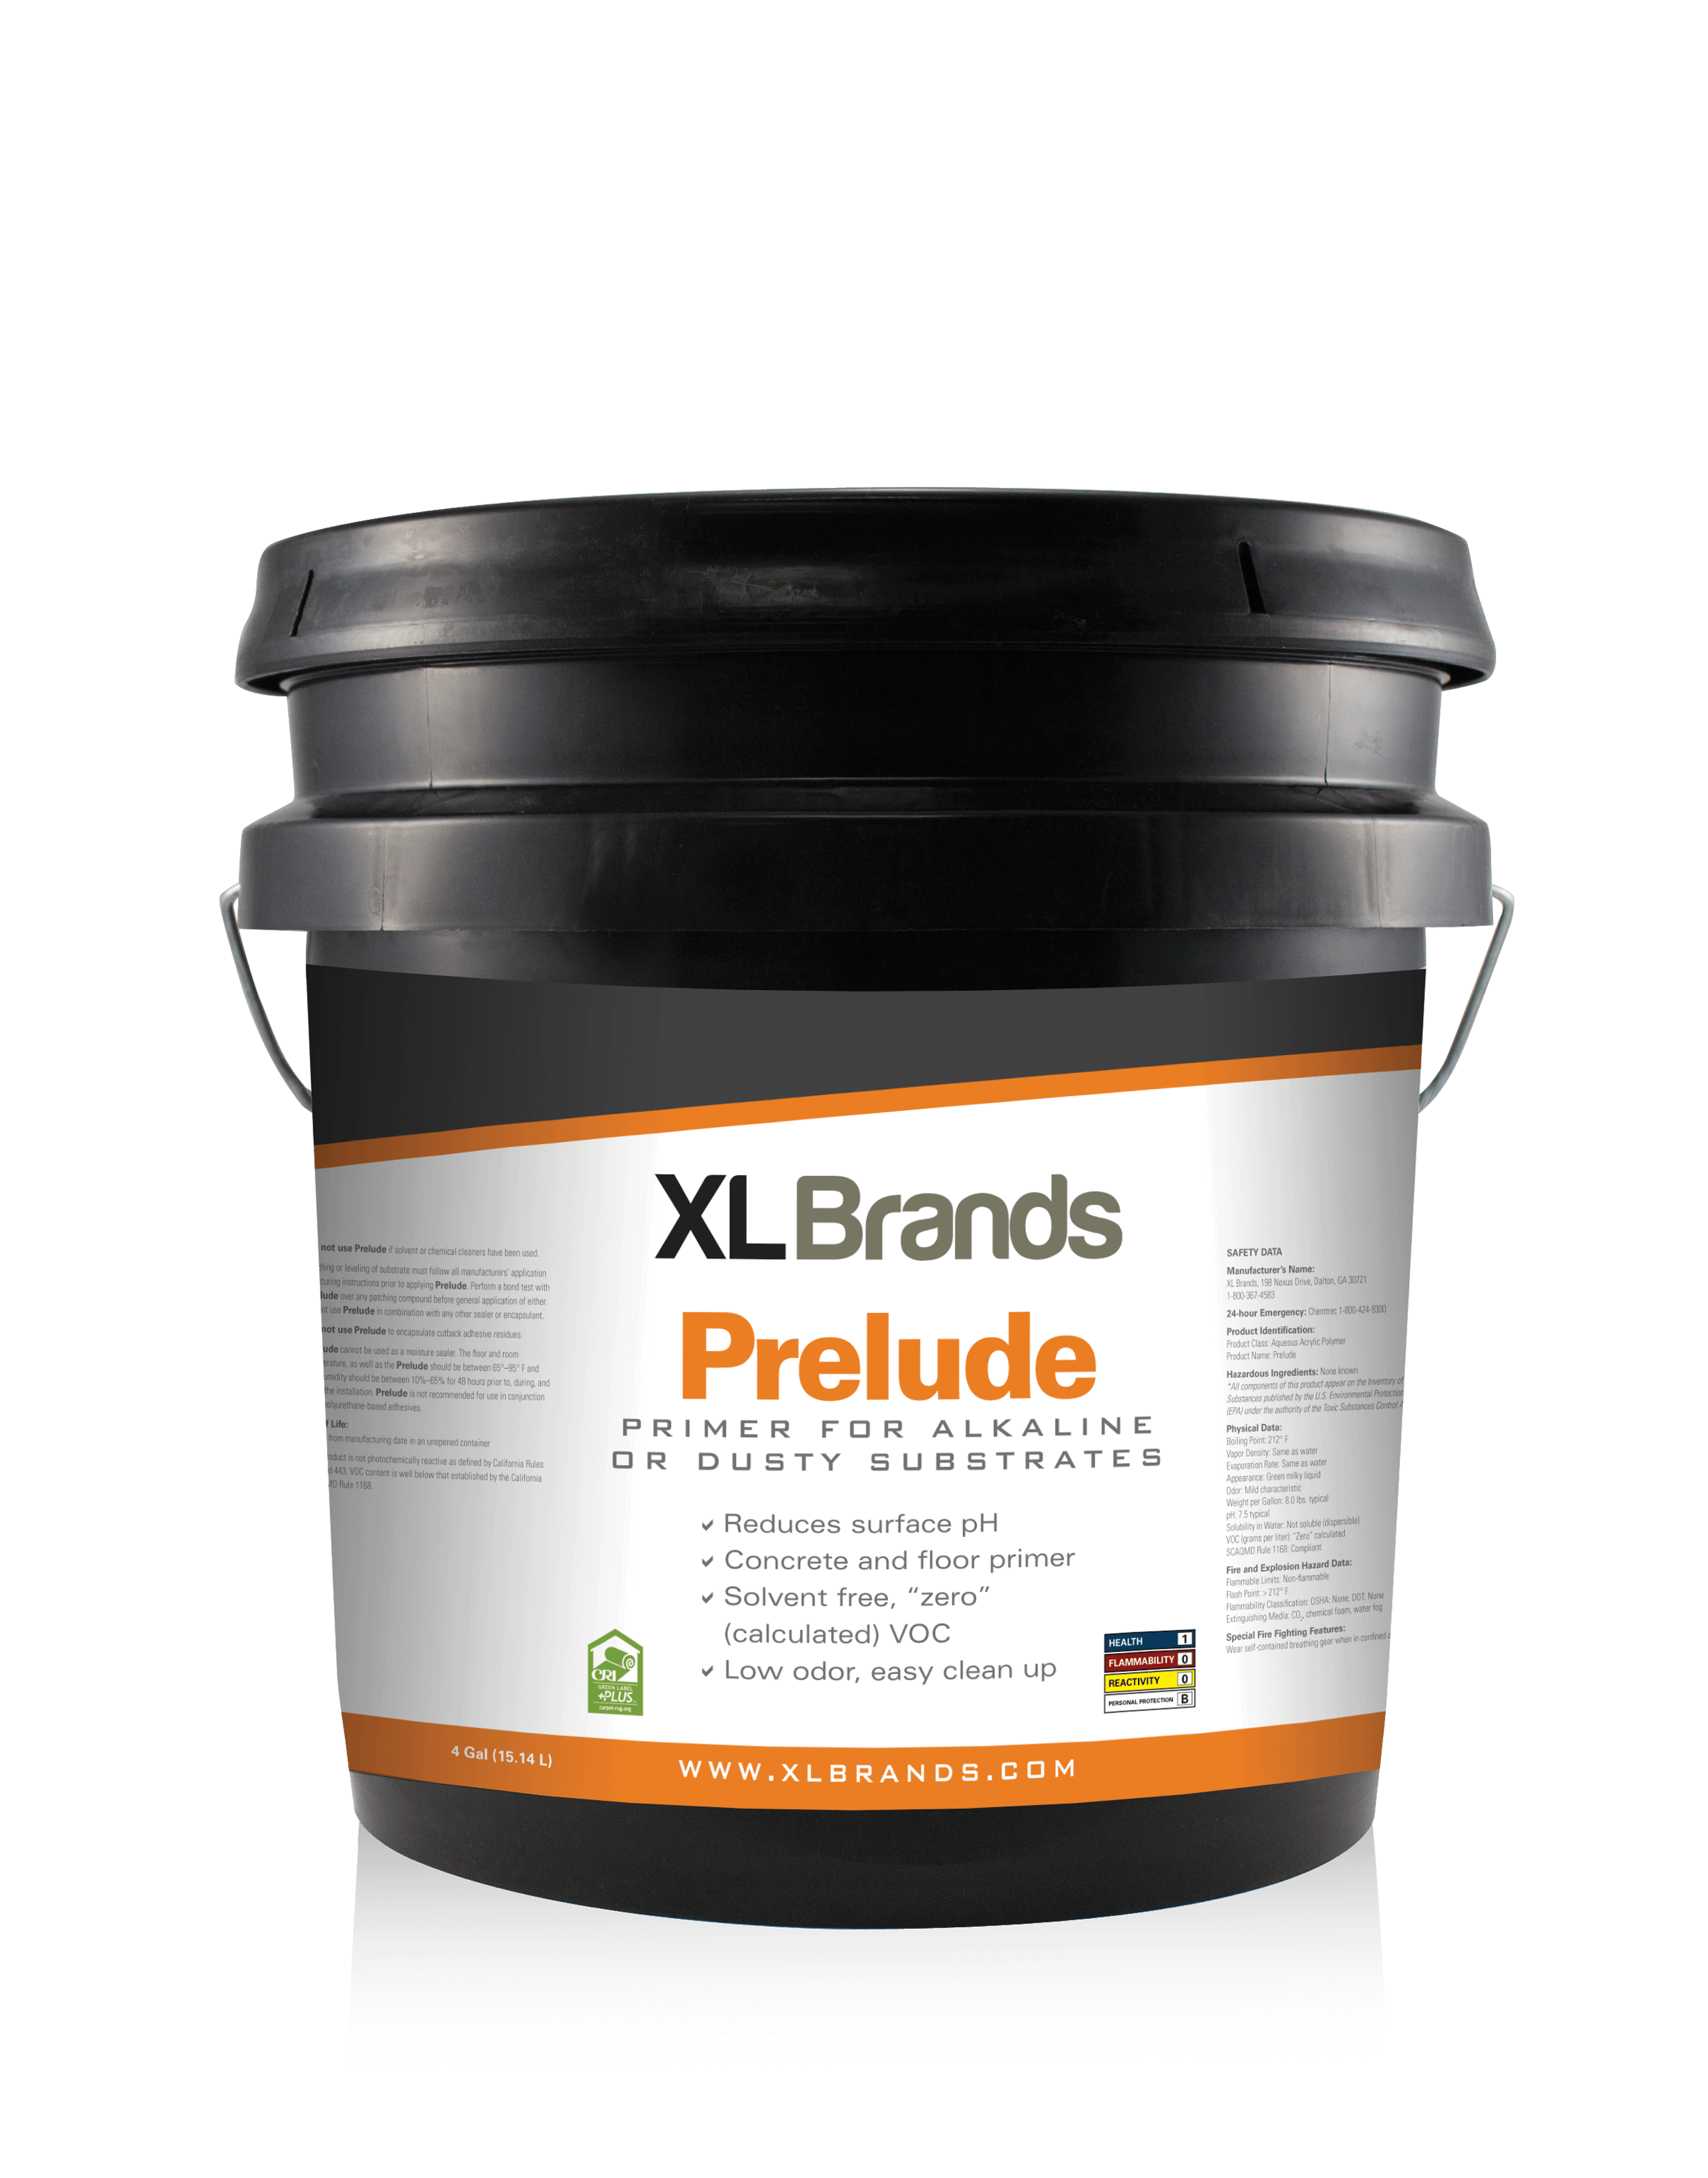 XL Brands Prelude Primer for Alkaline or Porous Substrates - 1 Gal Pail